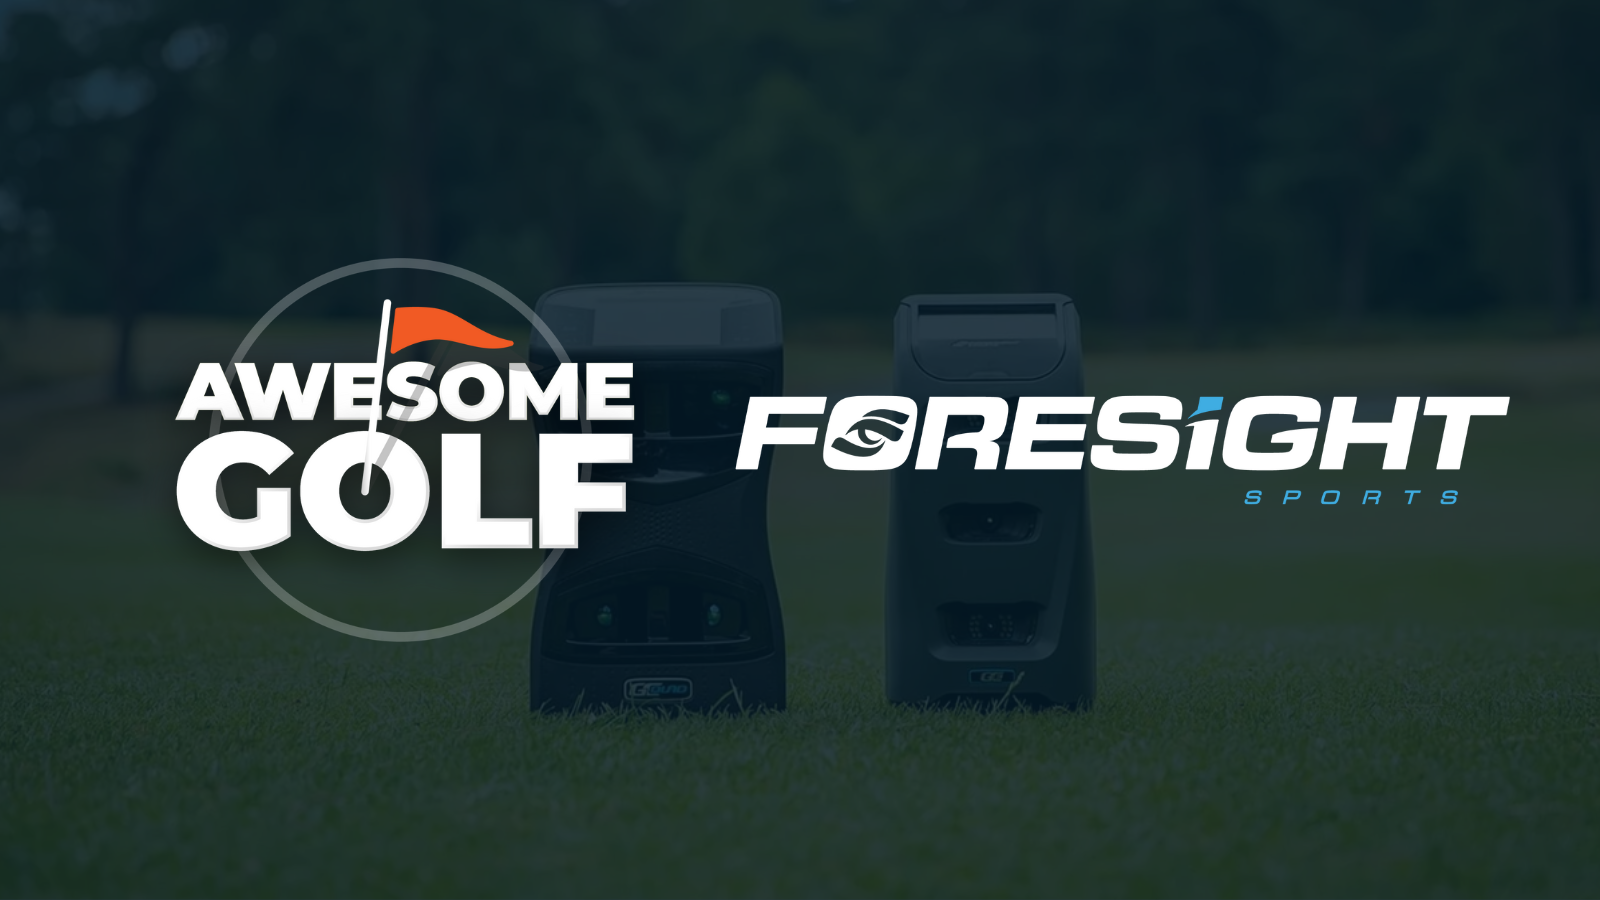 Awesome Golf x Foresight Sports